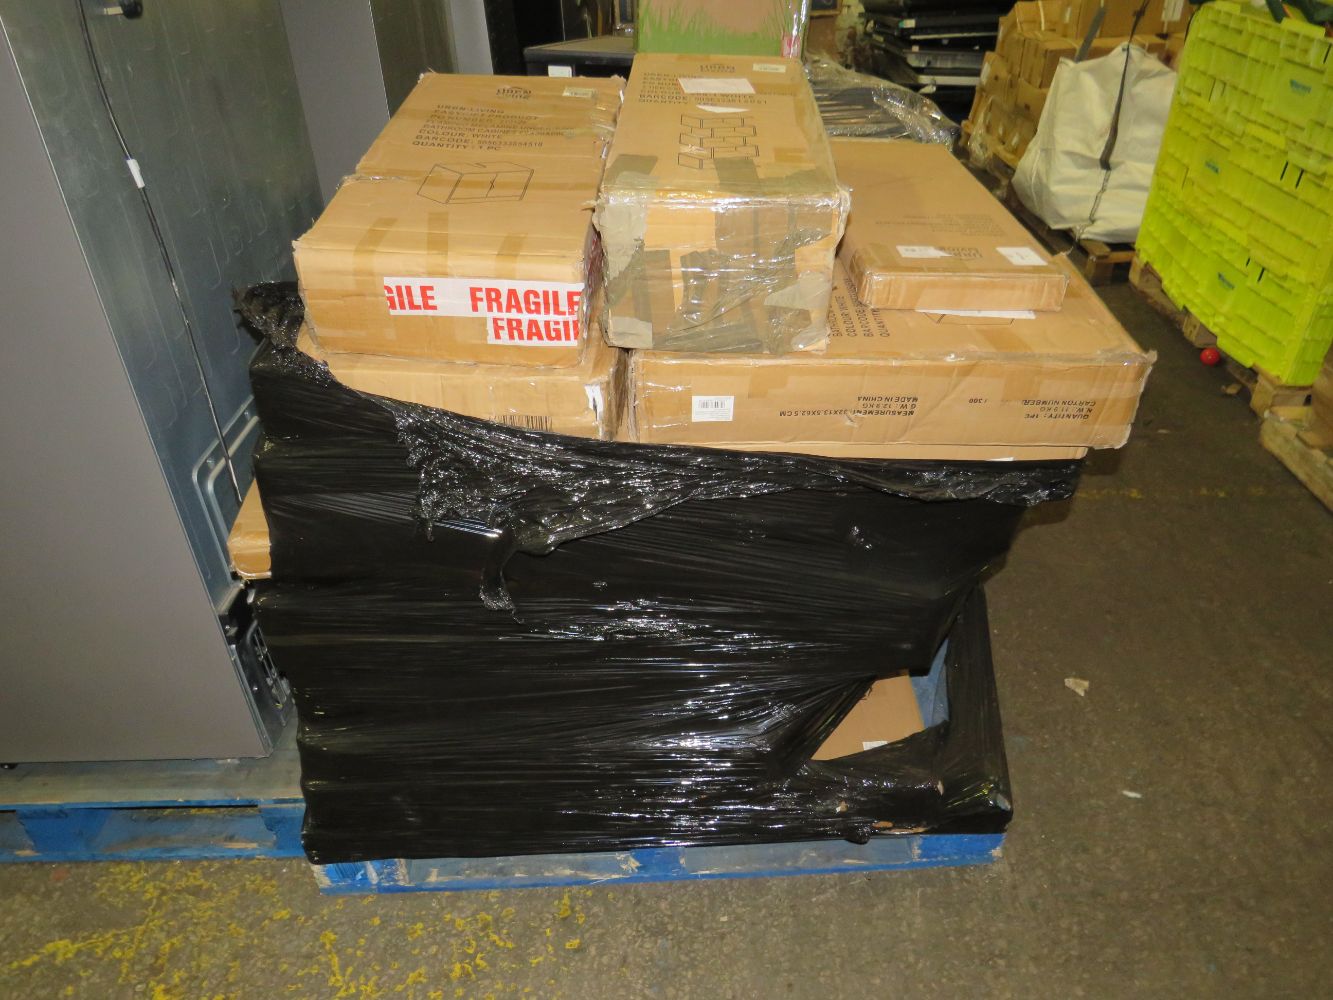 reduced start bids on Pallets of ex retail stock and damaged returns